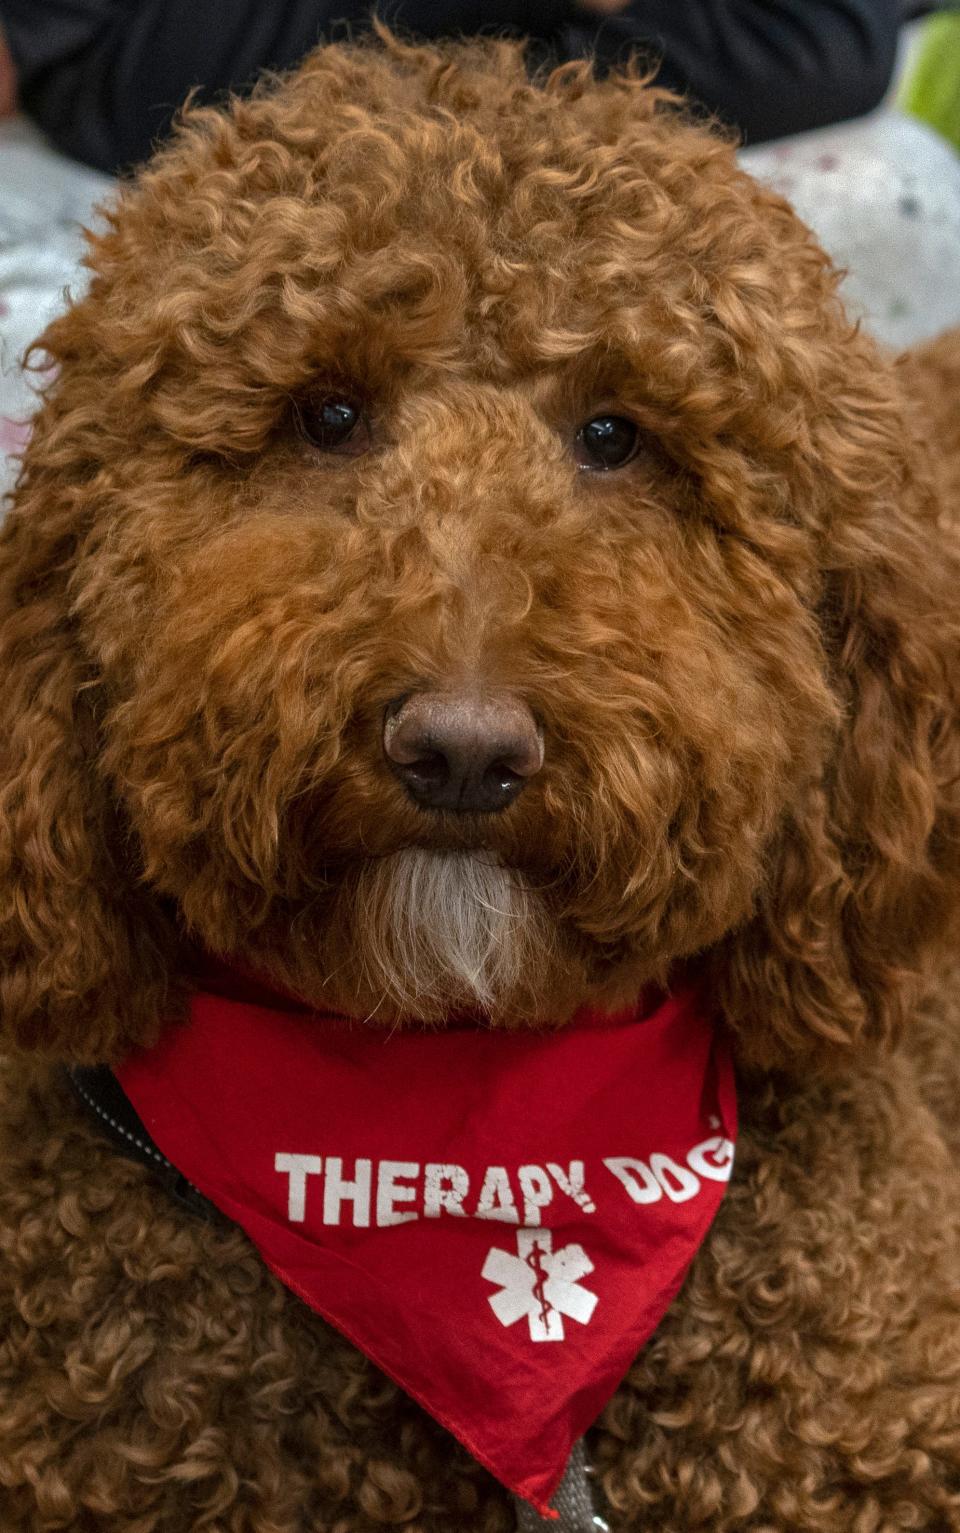 Appa is a therapy dog at College Wood Elementary School. In Carmel Clay Schools, eight therapy dogs and their handlers support children emotionally and give cuddles when needed. Photo taken Friday, March 3, 2023.